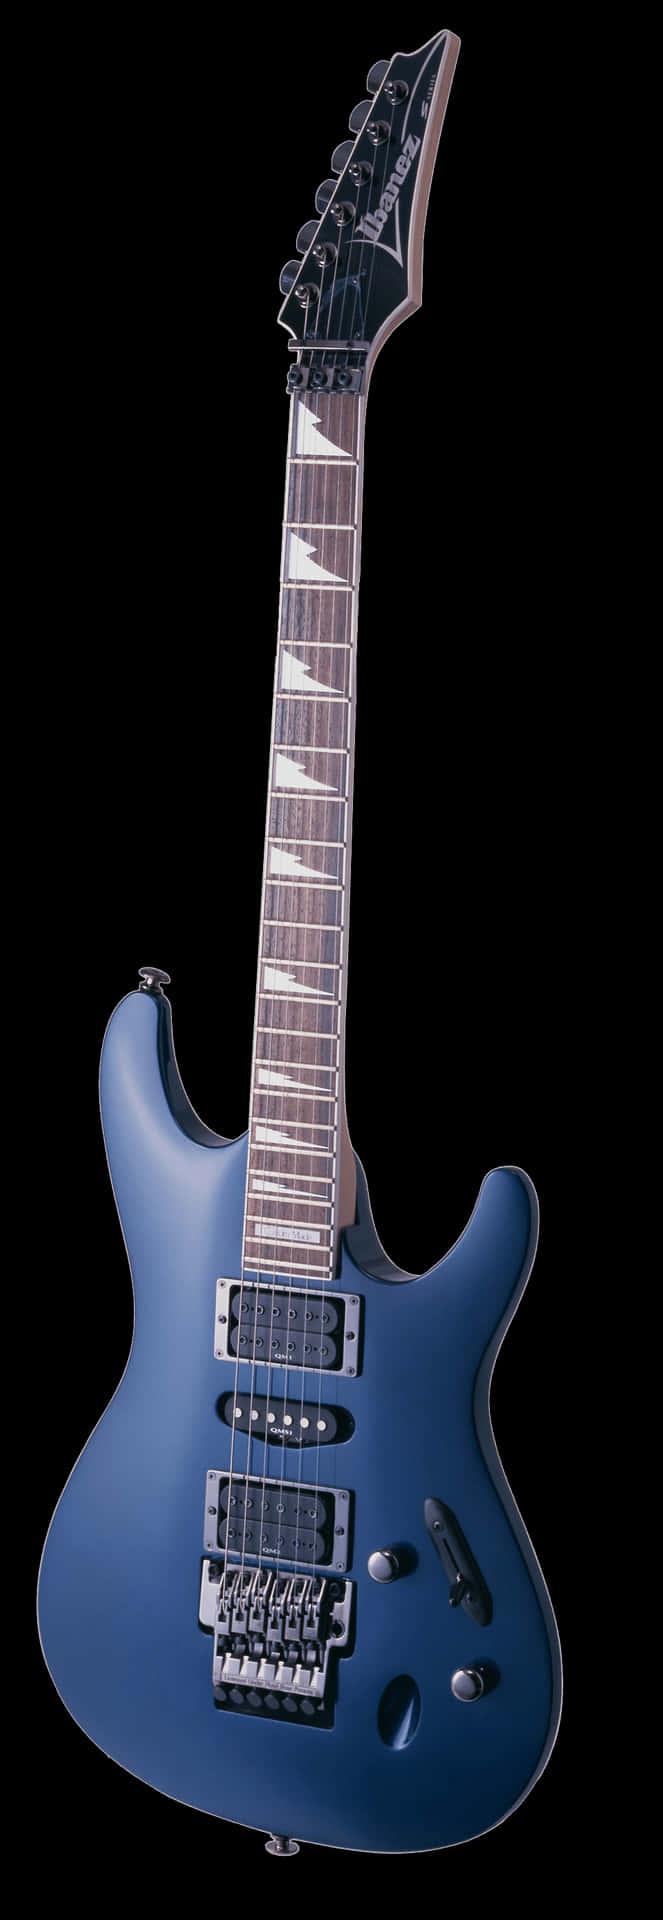 Blue Electric Guitar Isolated PNG